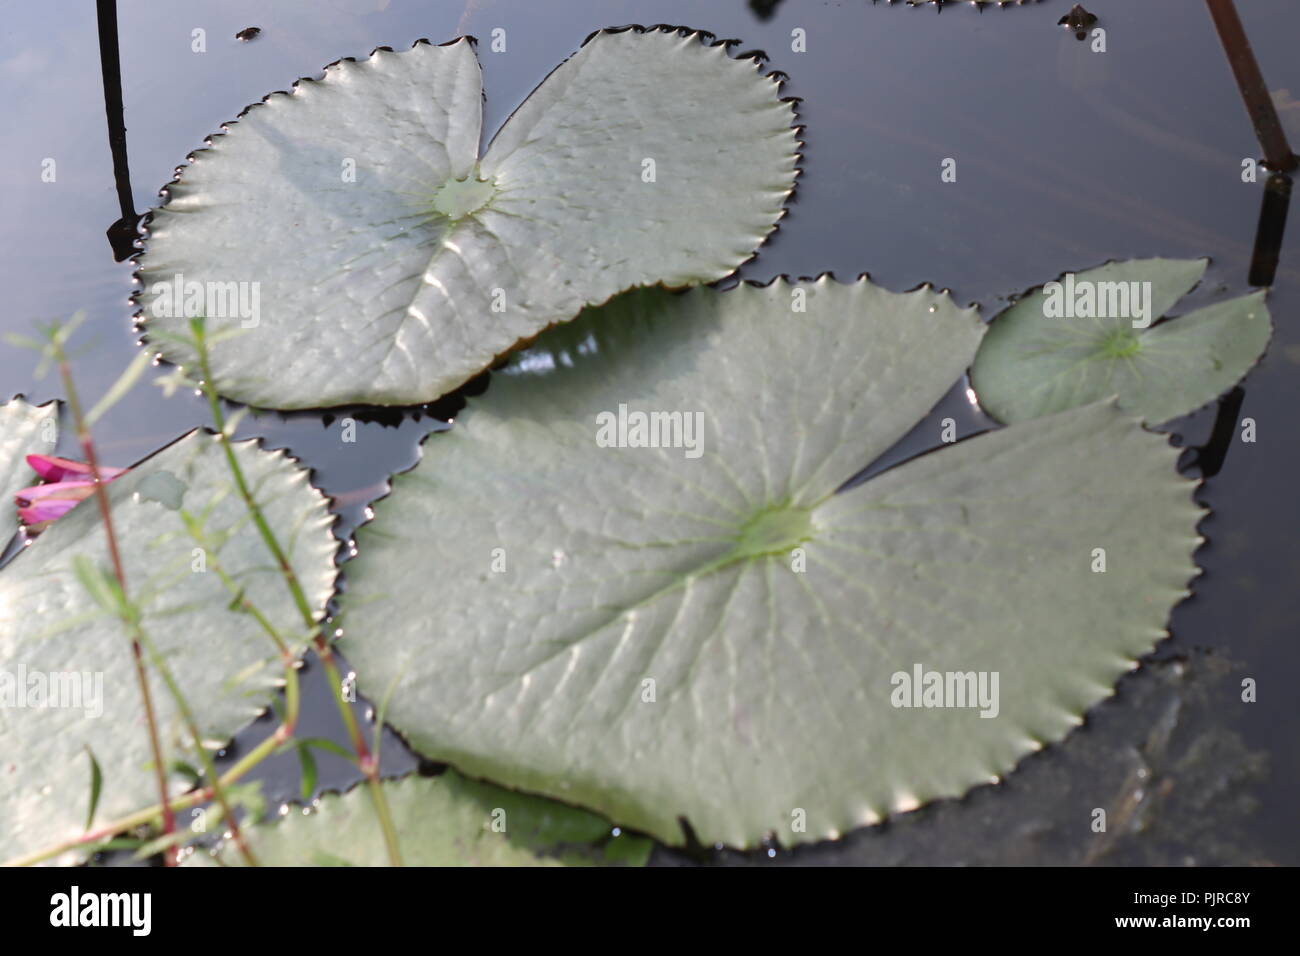 water lily lotus flower and leavesWater Lily leaf or lotus leaf.water lily Flower and Lotus Flower with Water Stock Photo